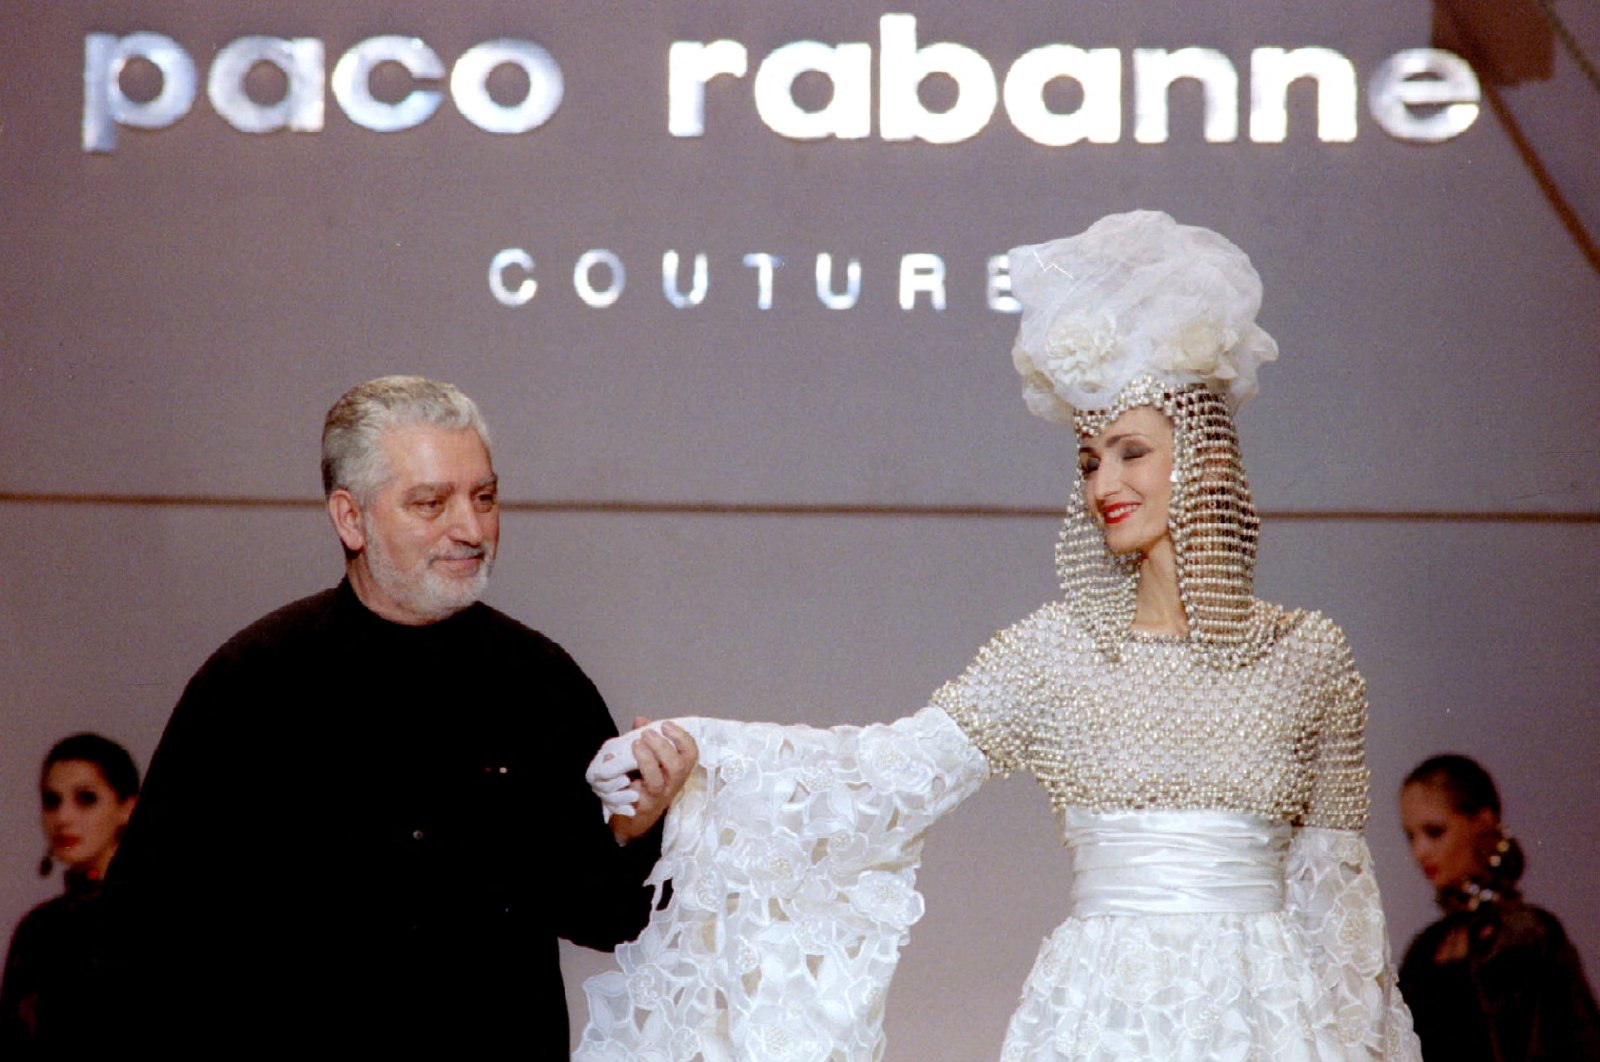 This undated photo shows French Fashion designer Paco Rabanne standing with one of his models at the finale of his show at the Rossiya Hotel in Moscow. (Reuters Photo)